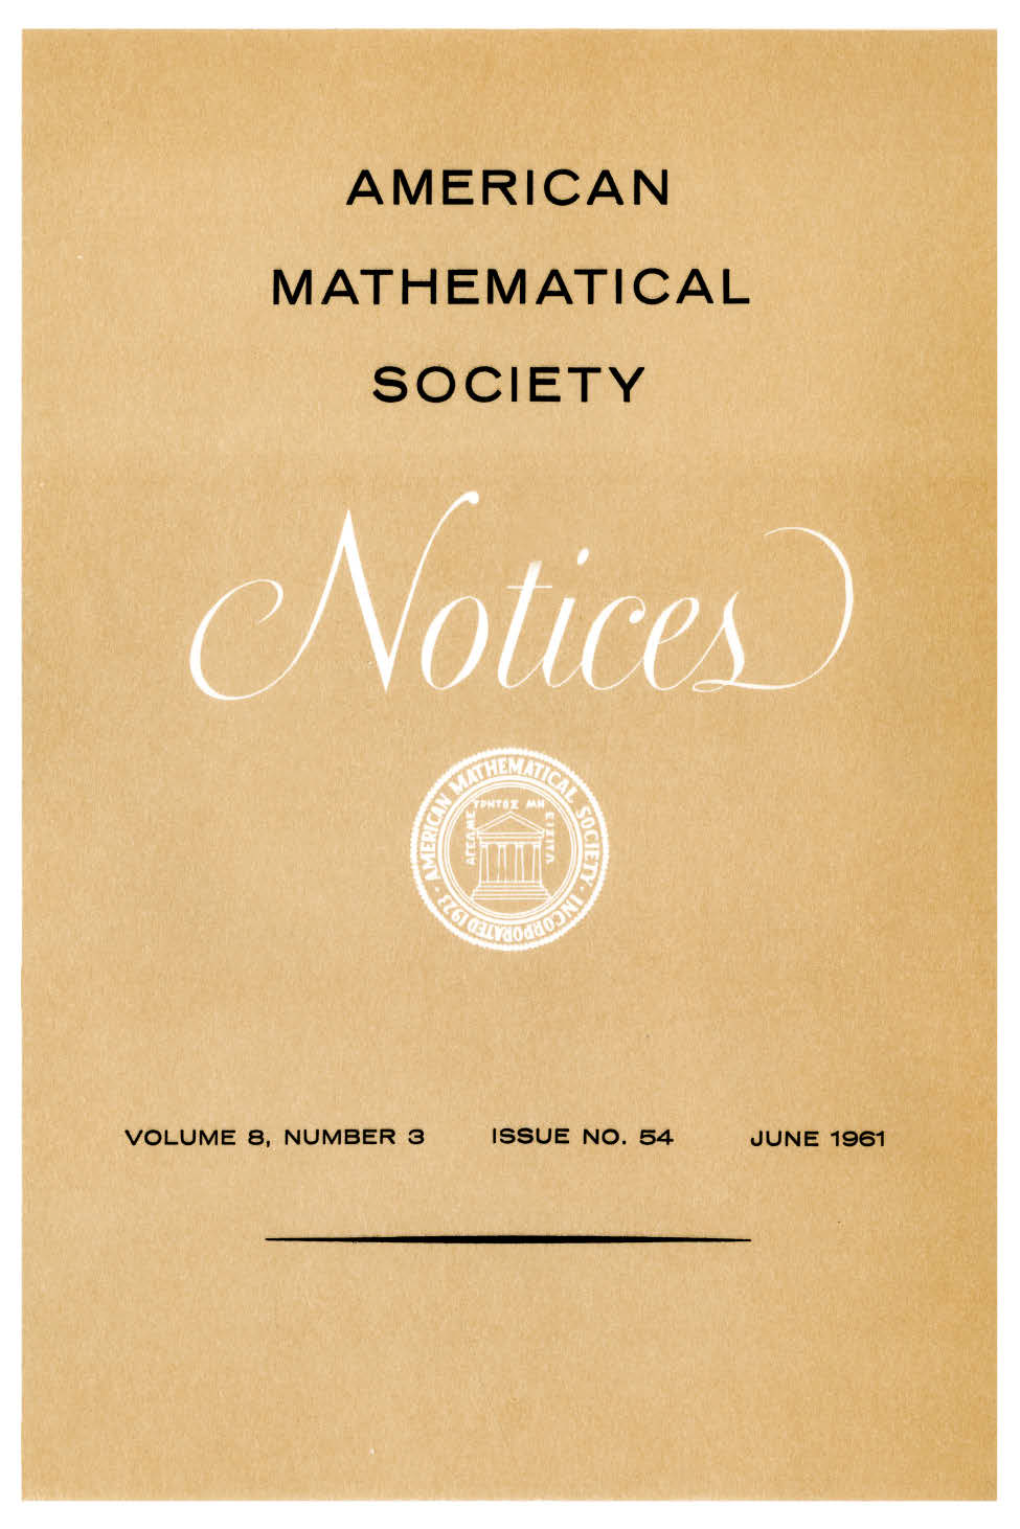 The American Mathematical Society